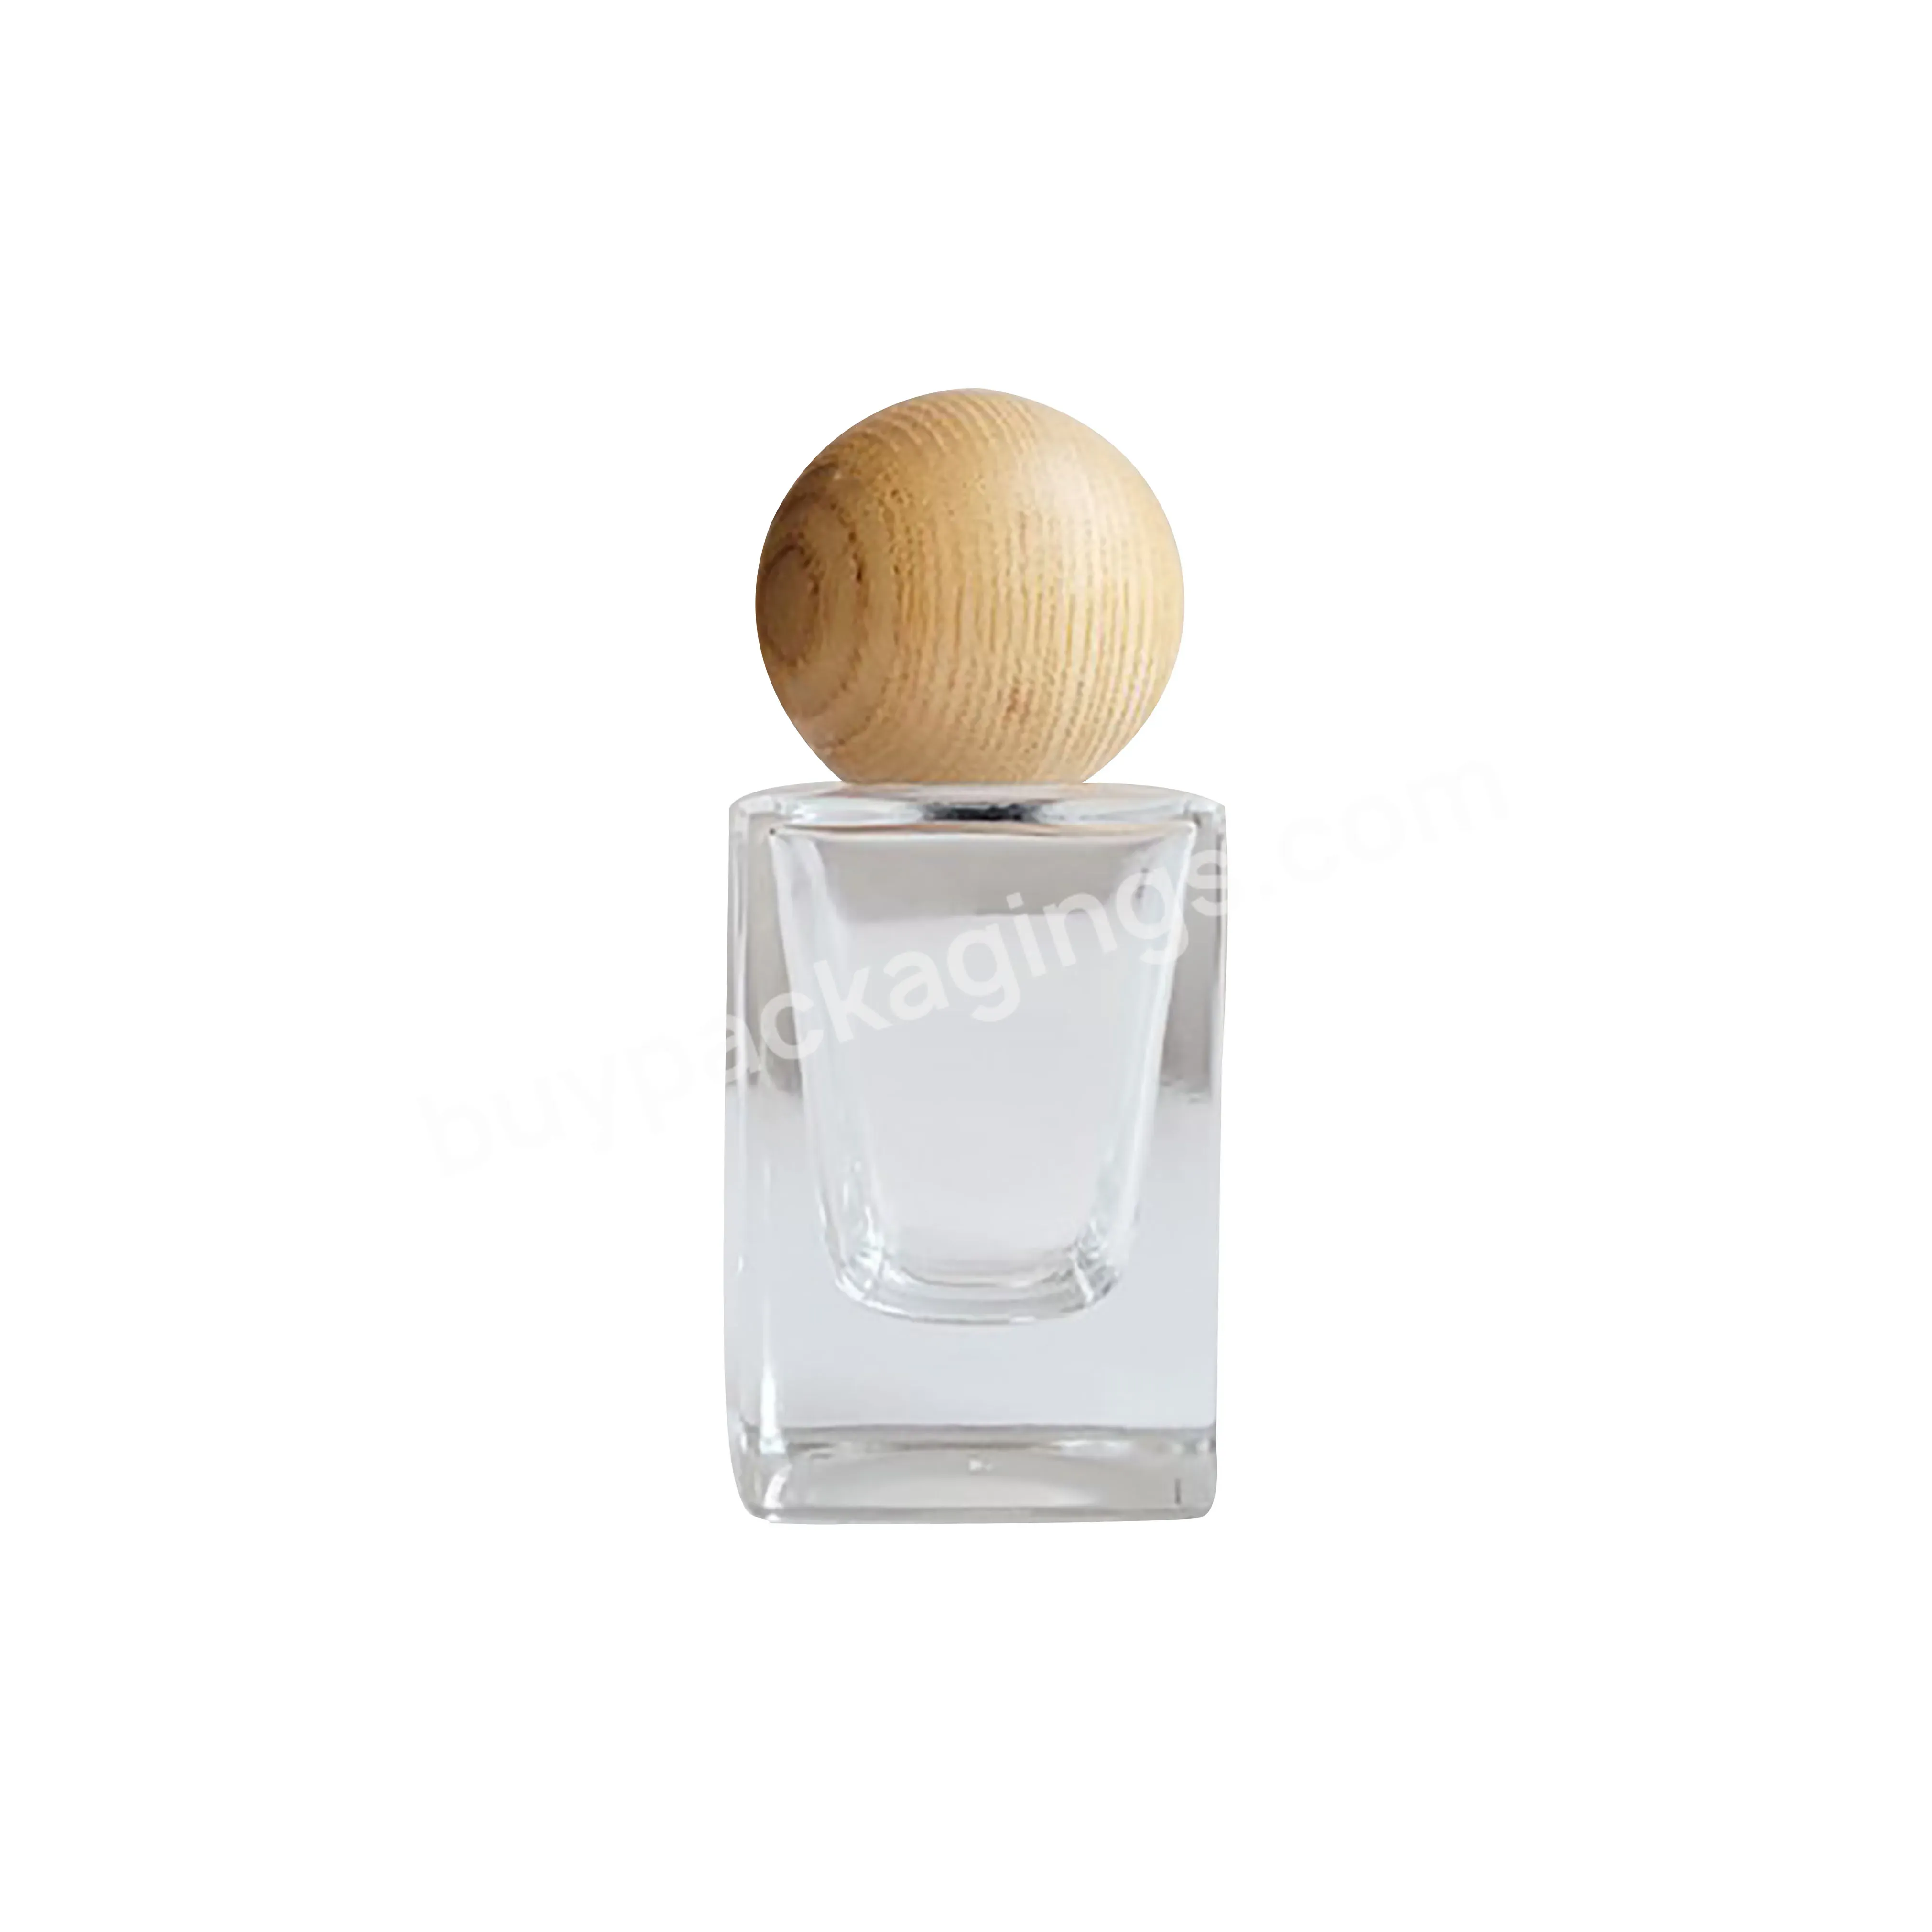 High Quality Square 15ml 30ml 50ml Electrified Aluminum Card Spray Square Glass Perfume Bottle With Gold Wooden Ball Cap - Buy High Quality Square 15ml 30ml 50ml Electrified Aluminum Card Spray Bottle,Square Glass Perfume Bottle,Bottle With Gold Wood